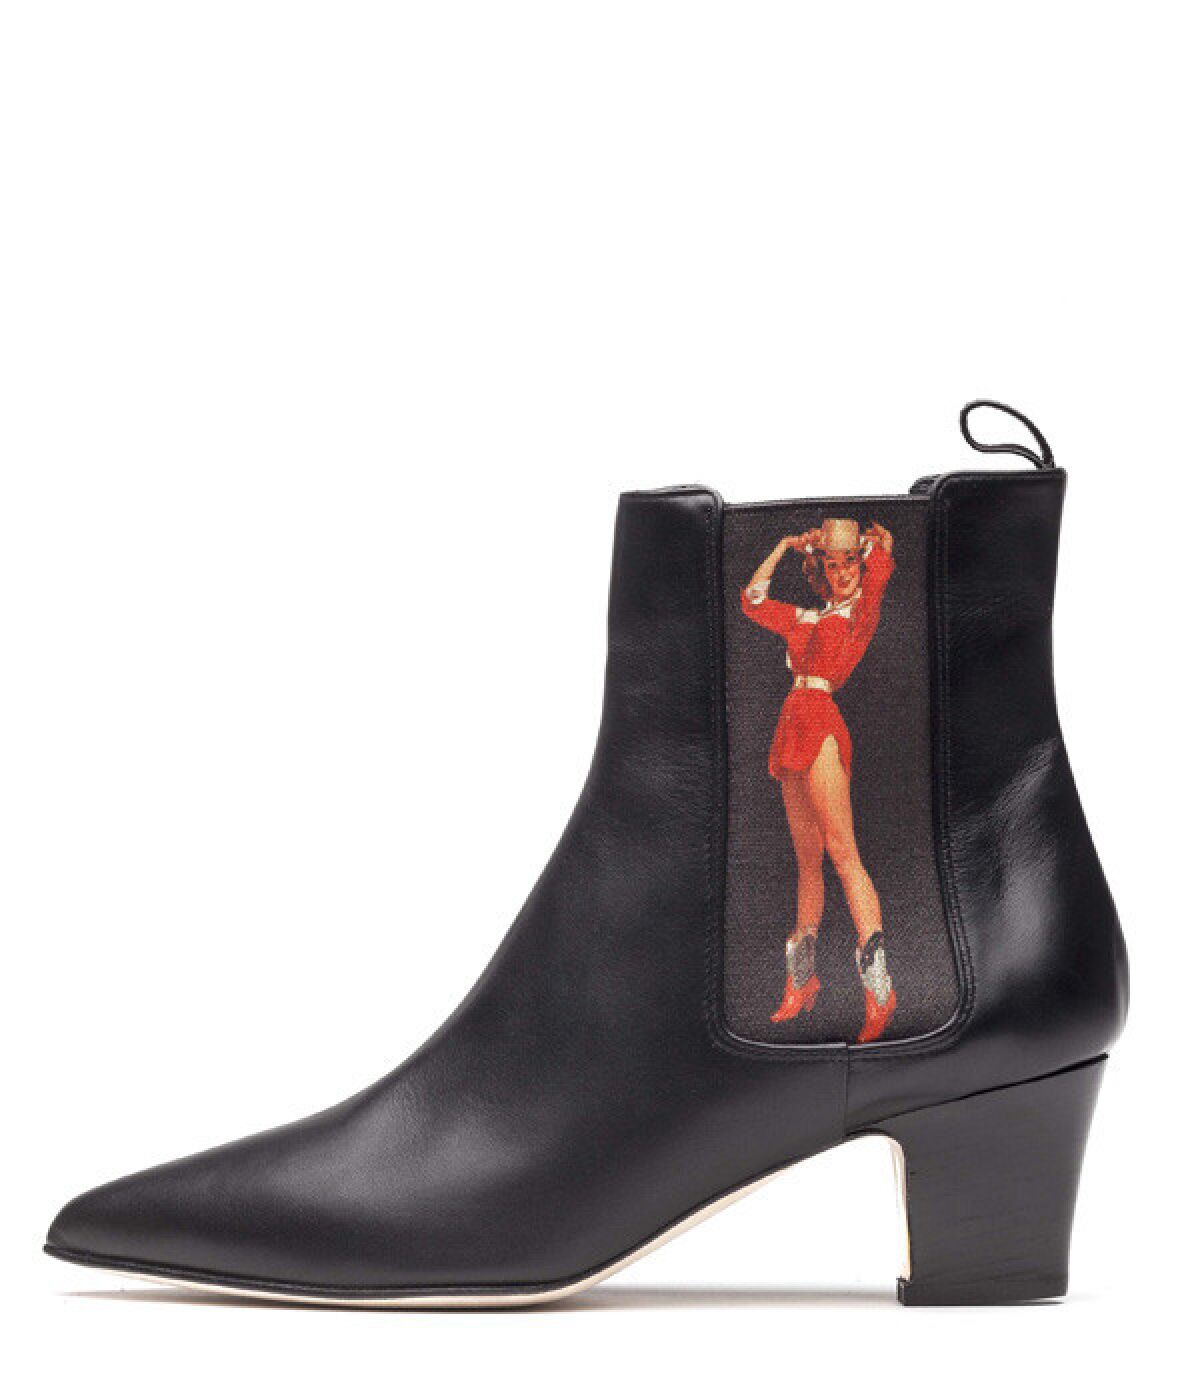 Rupert Sanderson "Frances" calf leather ankle boot with cowgirl print.